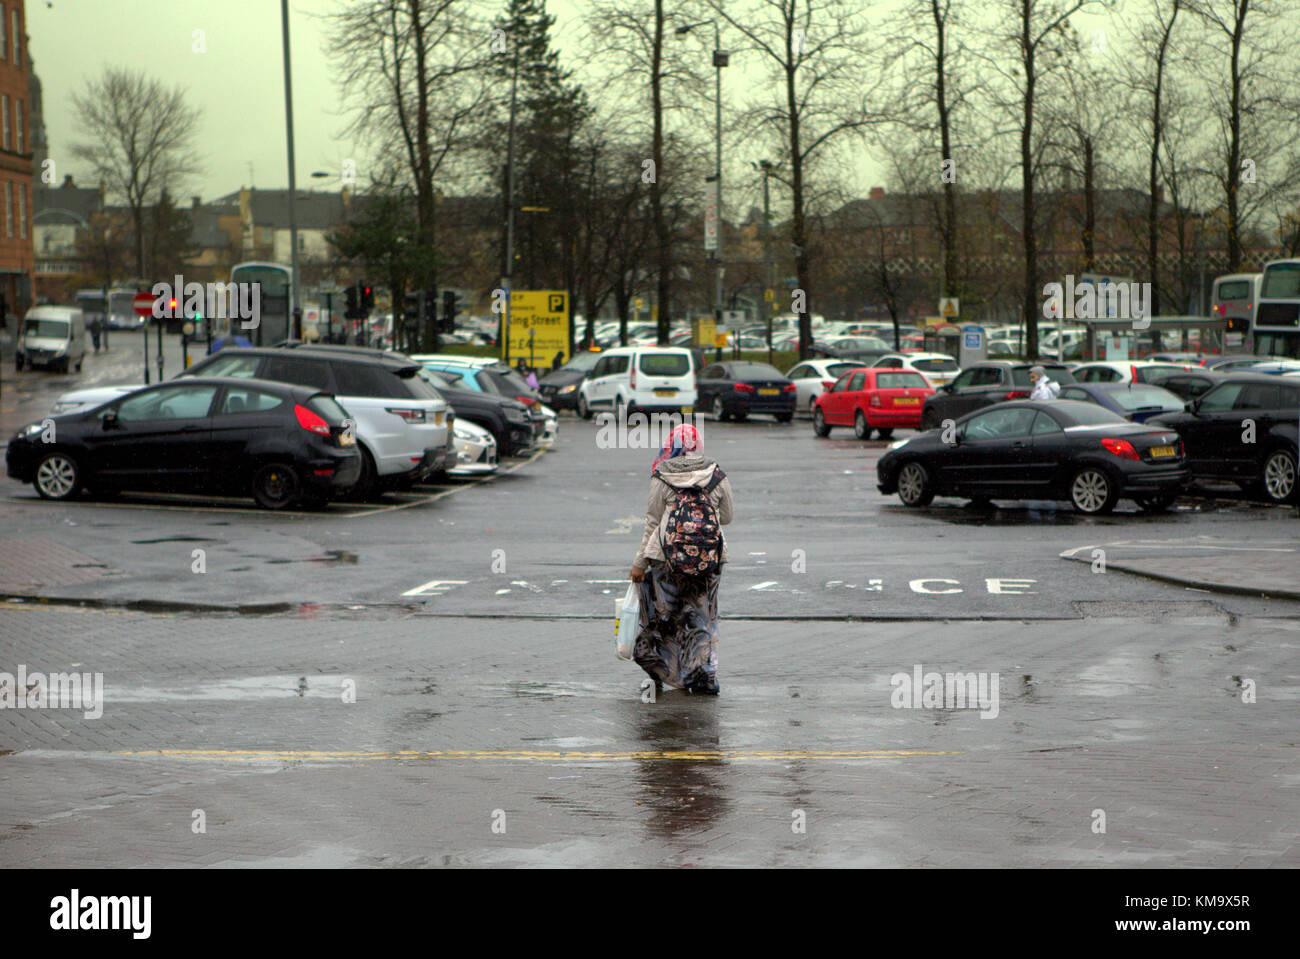 uk street view foreigner hijab scarf with shopping in front of  car park entrance sign on the road surface wide open view wet street rainy day Stock Photo